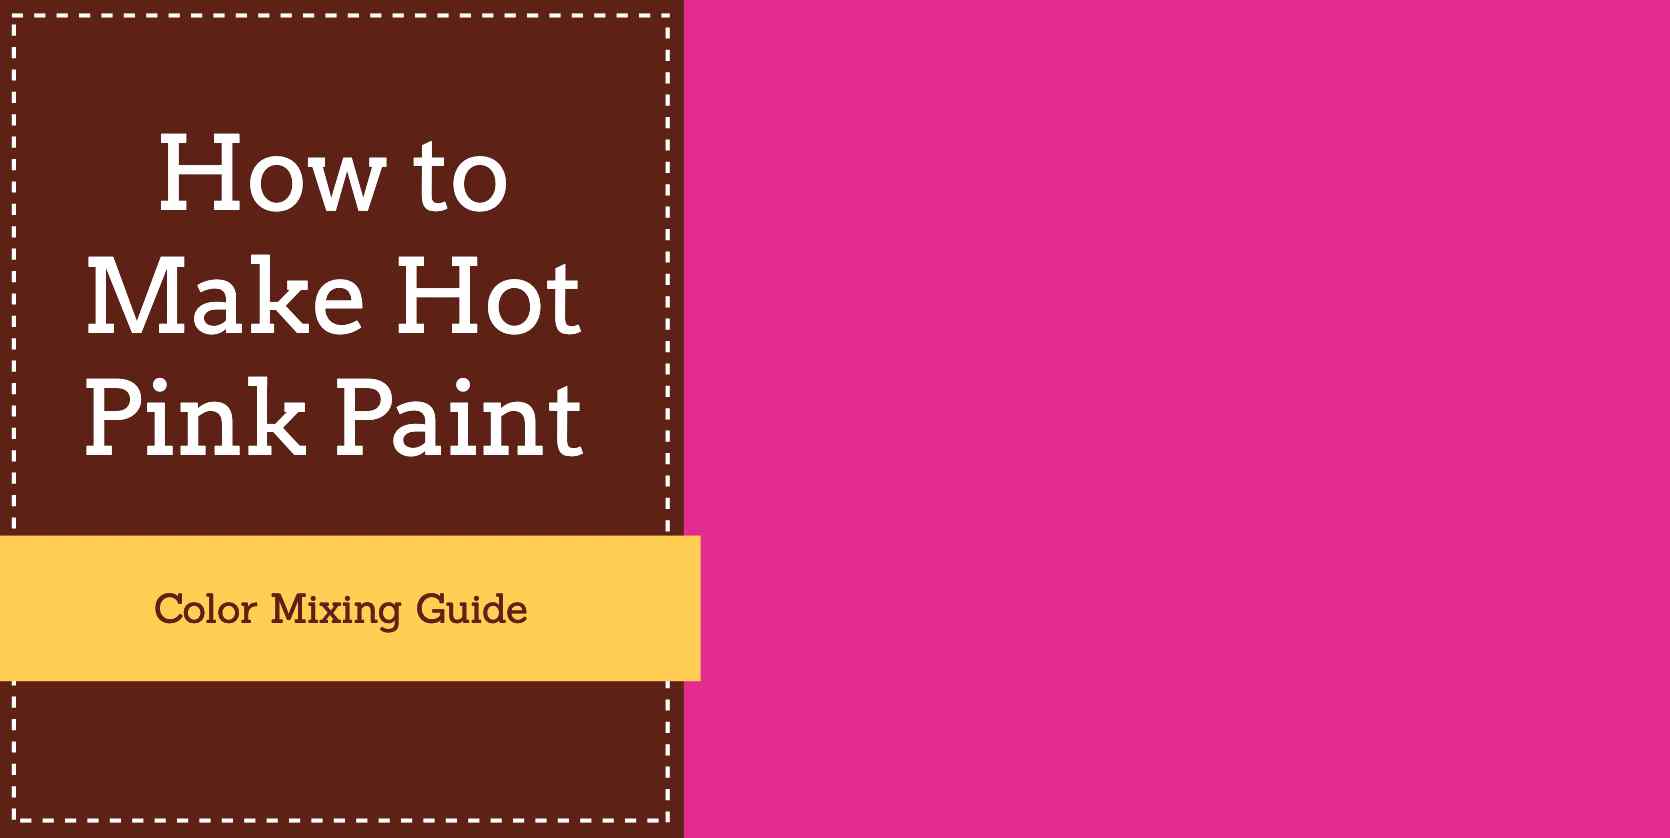 How to make hot pink paint